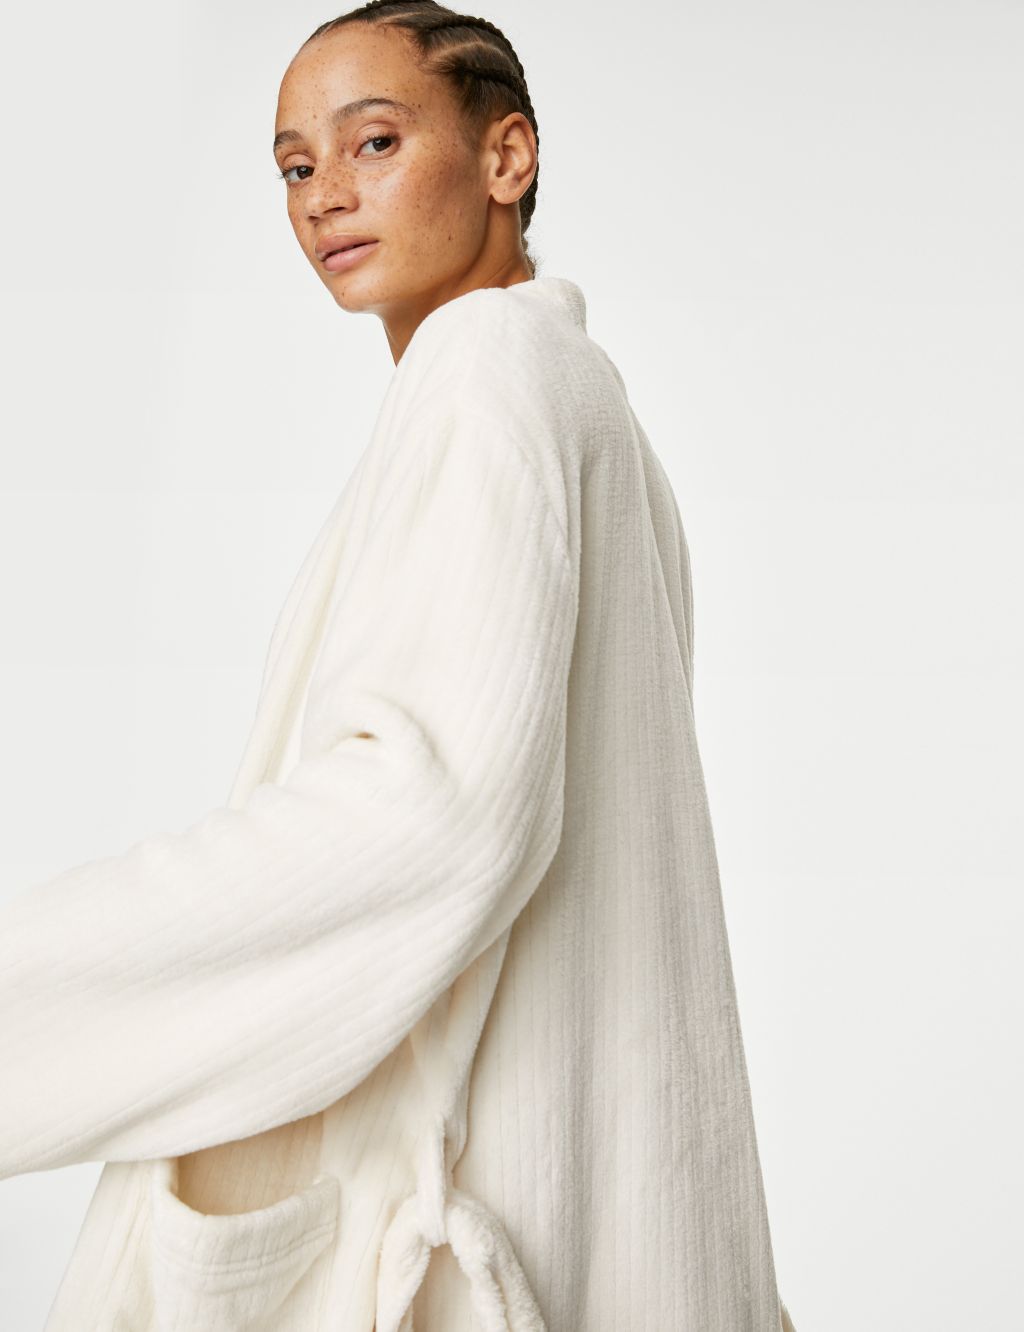 Fleece Ribbed Short Dressing Gown image 1